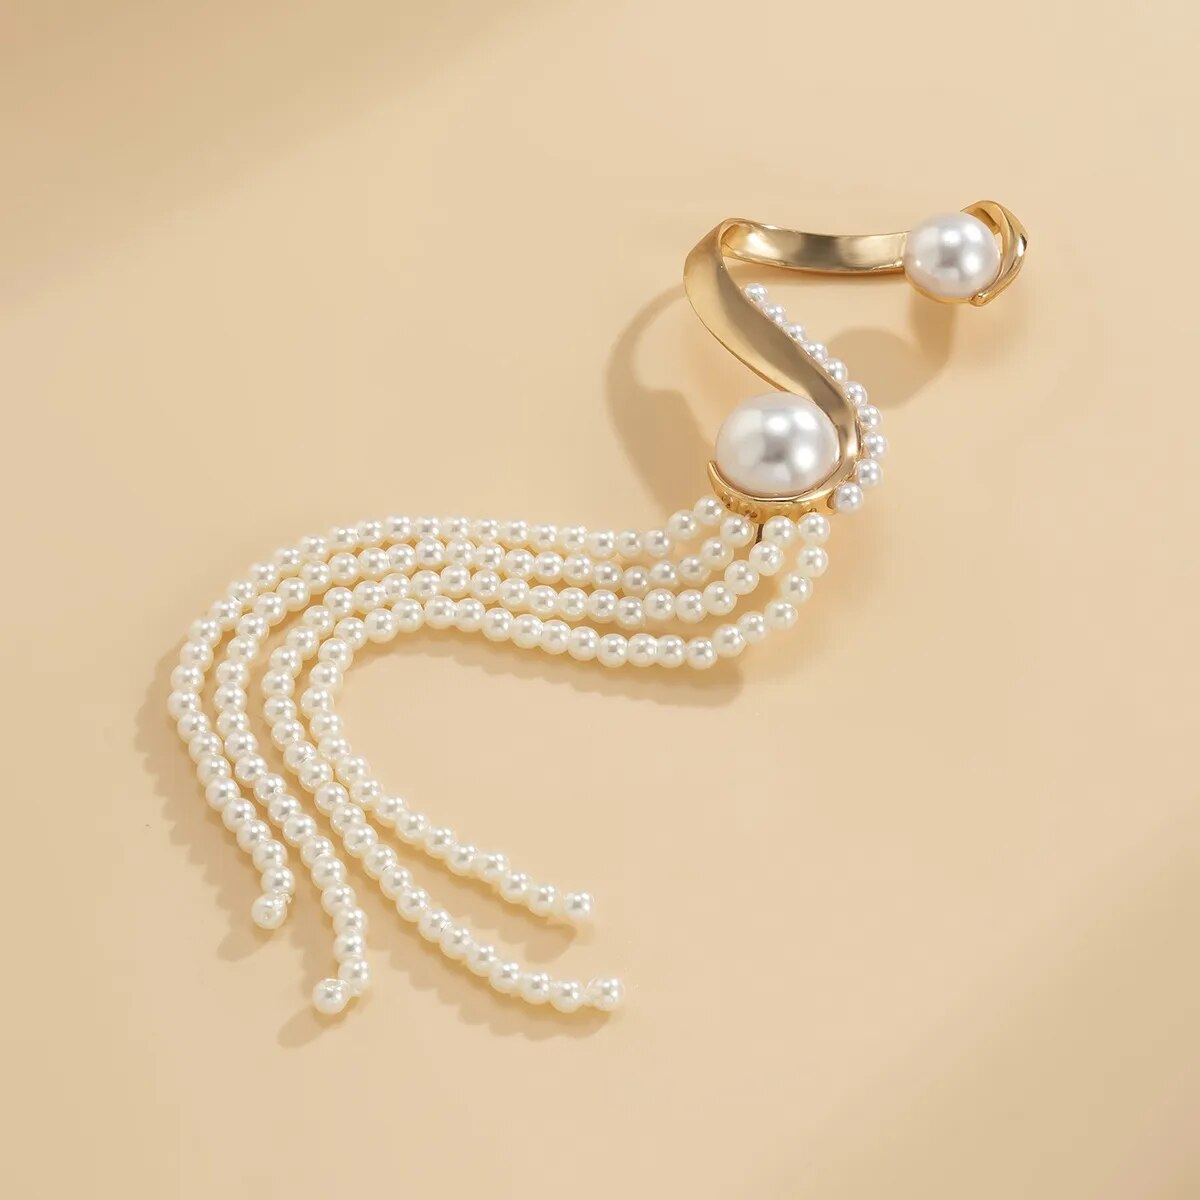 Glamour Icon Pearl Climber Earrings